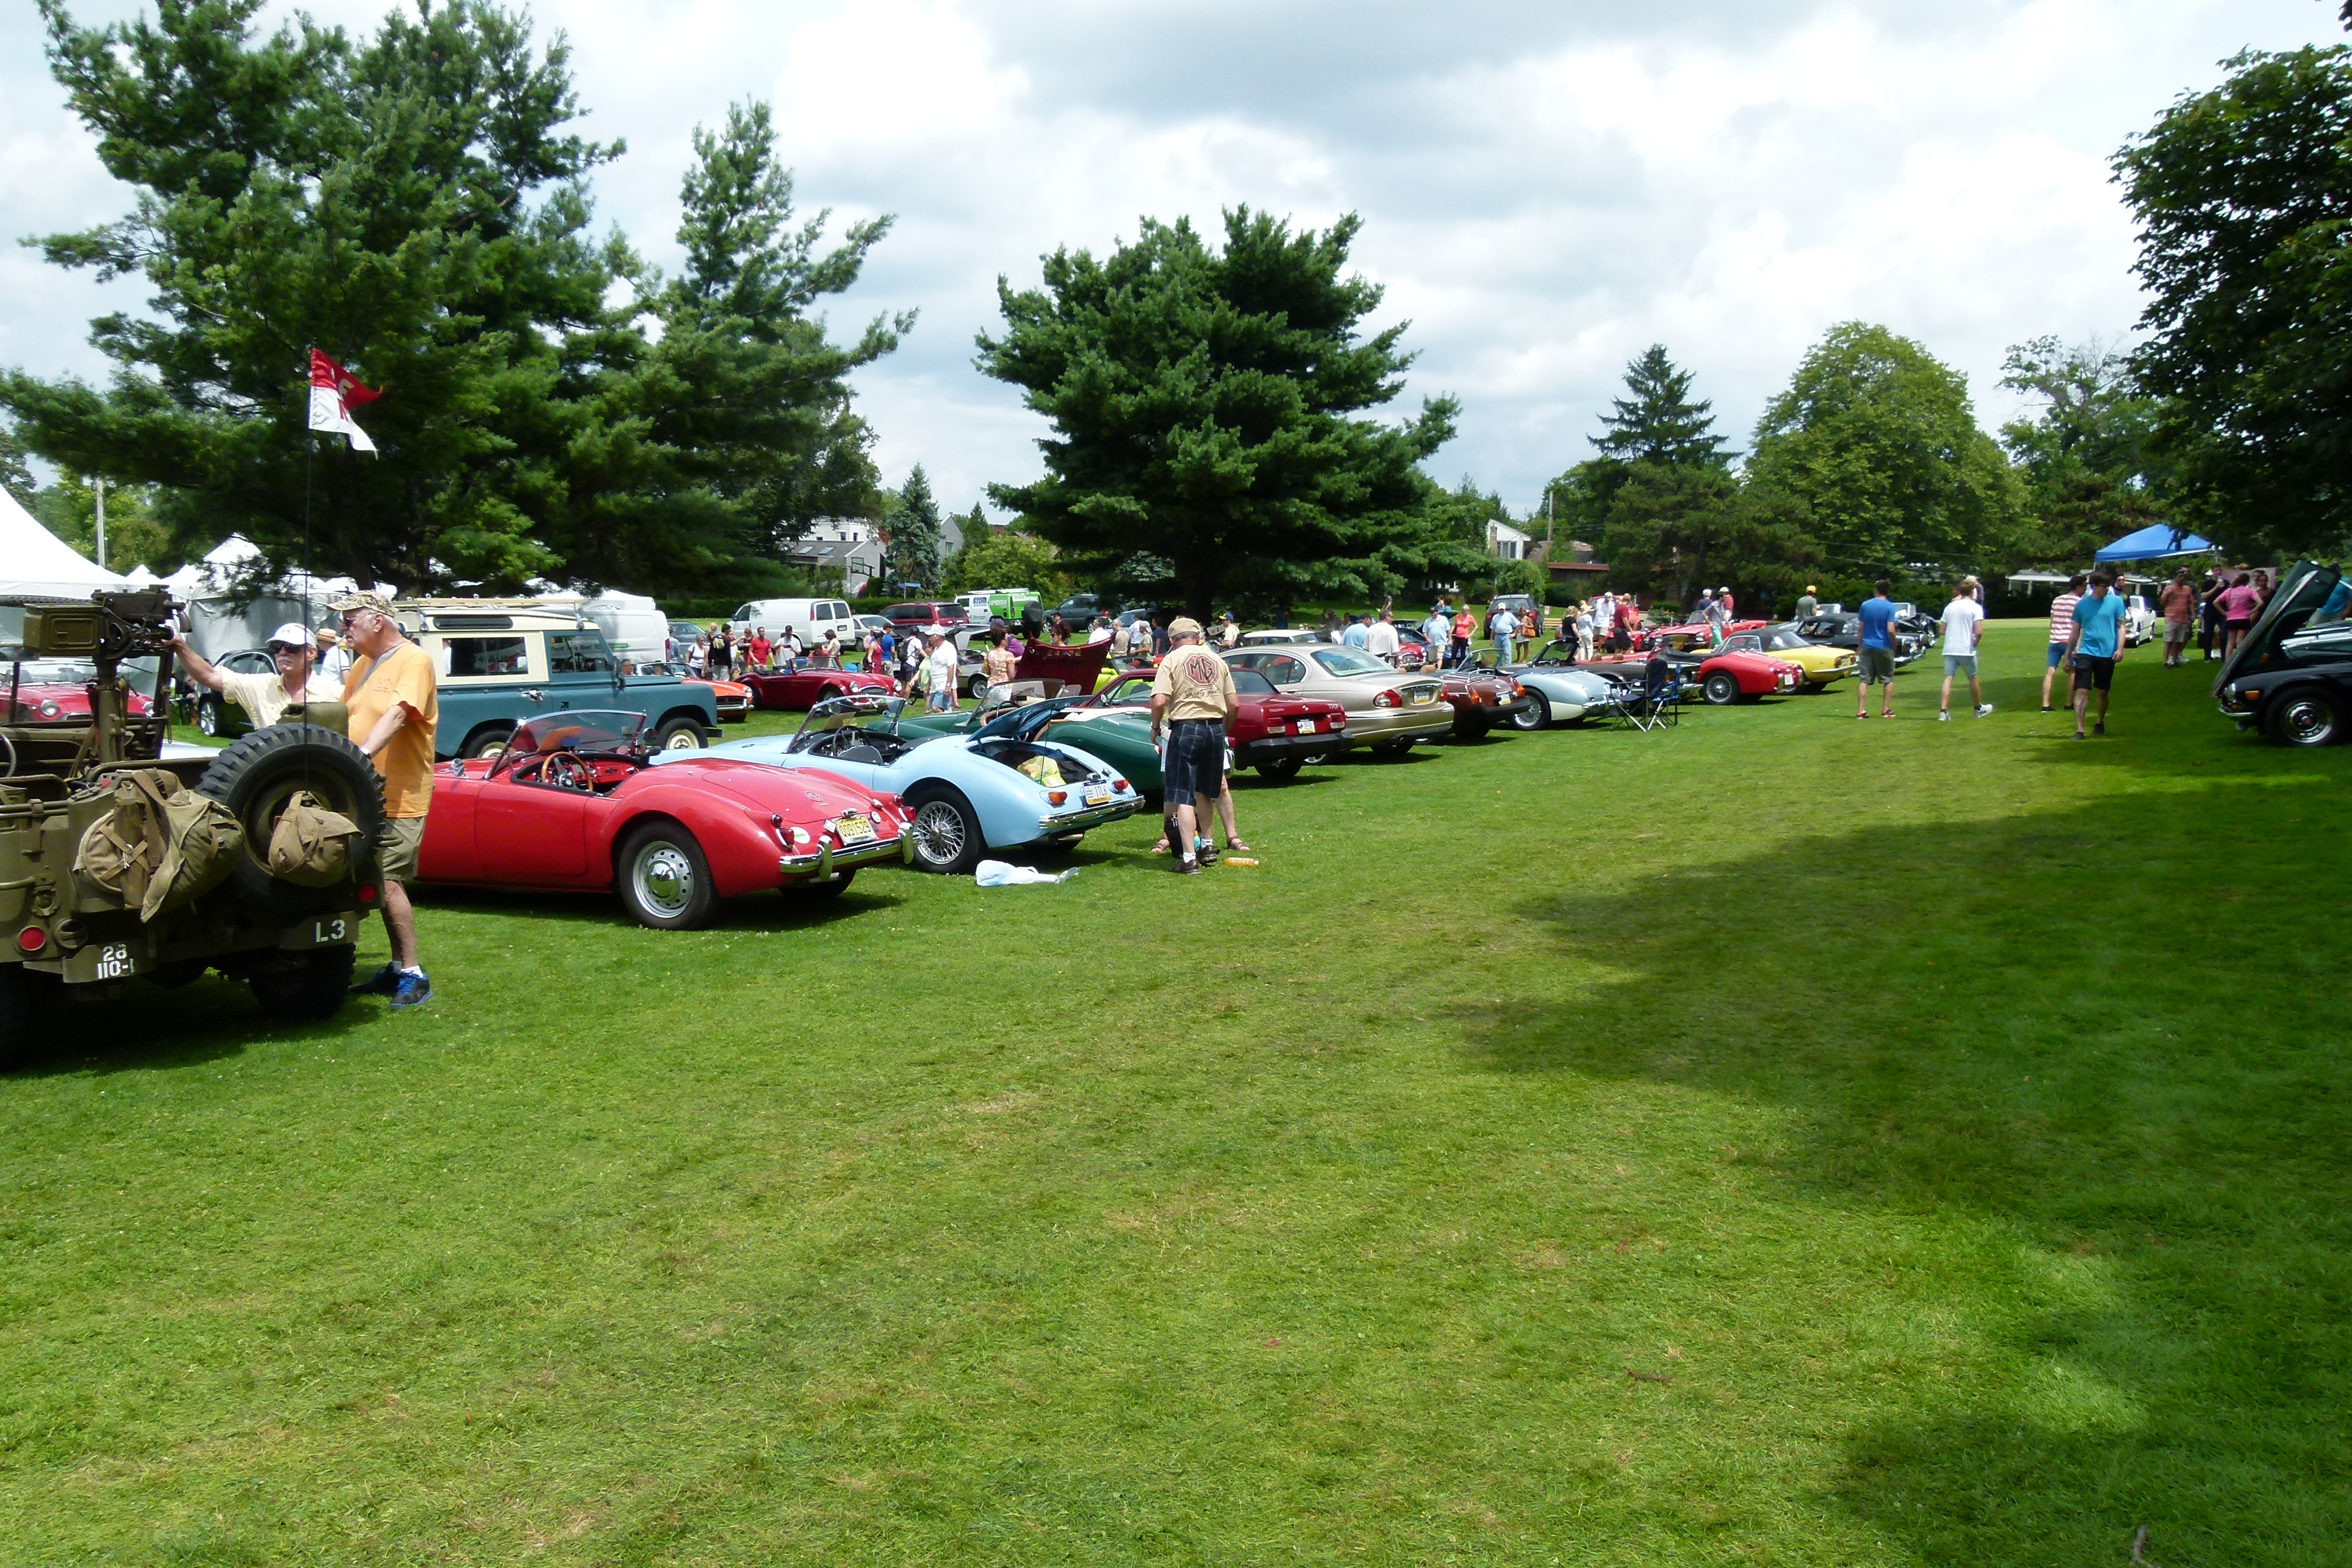 Many beautiful cars of different makes and models line the greens.